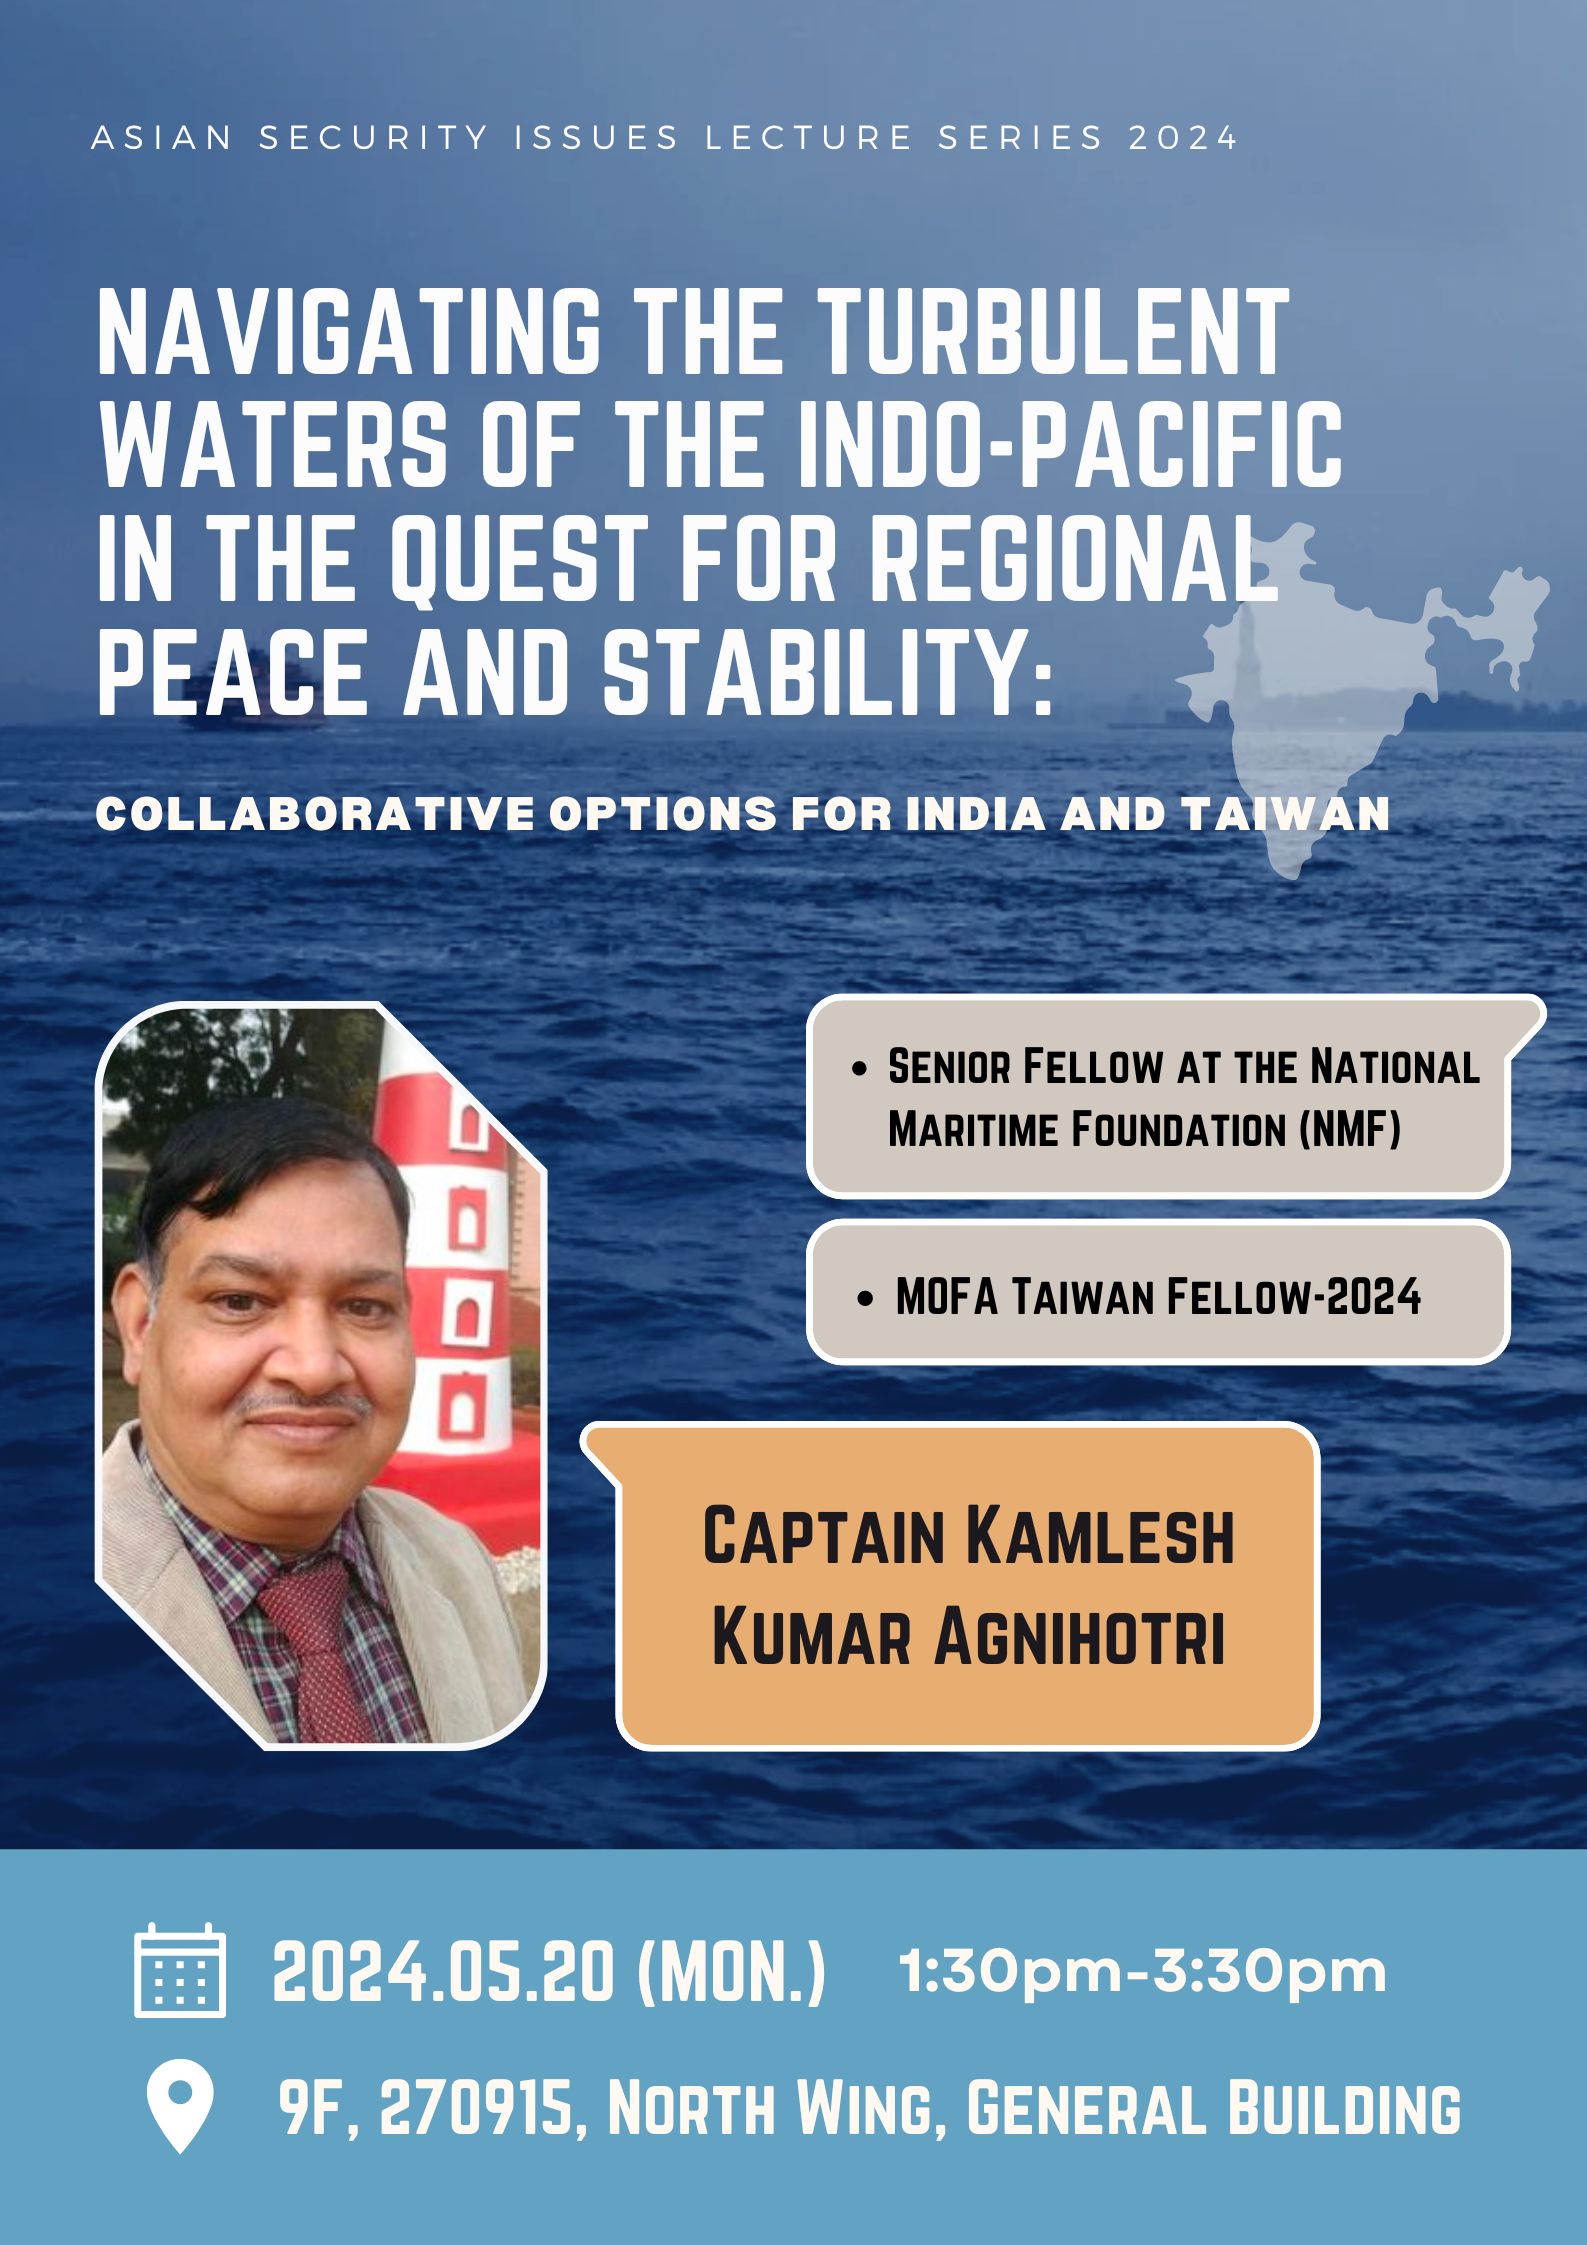 5/20 Asian Security Issues lecture series：Navigating the Turbulent Waters of the Indo-Pacific in the Quest for Regional Peace and Stability: Collaborative Options for India and Taiwan